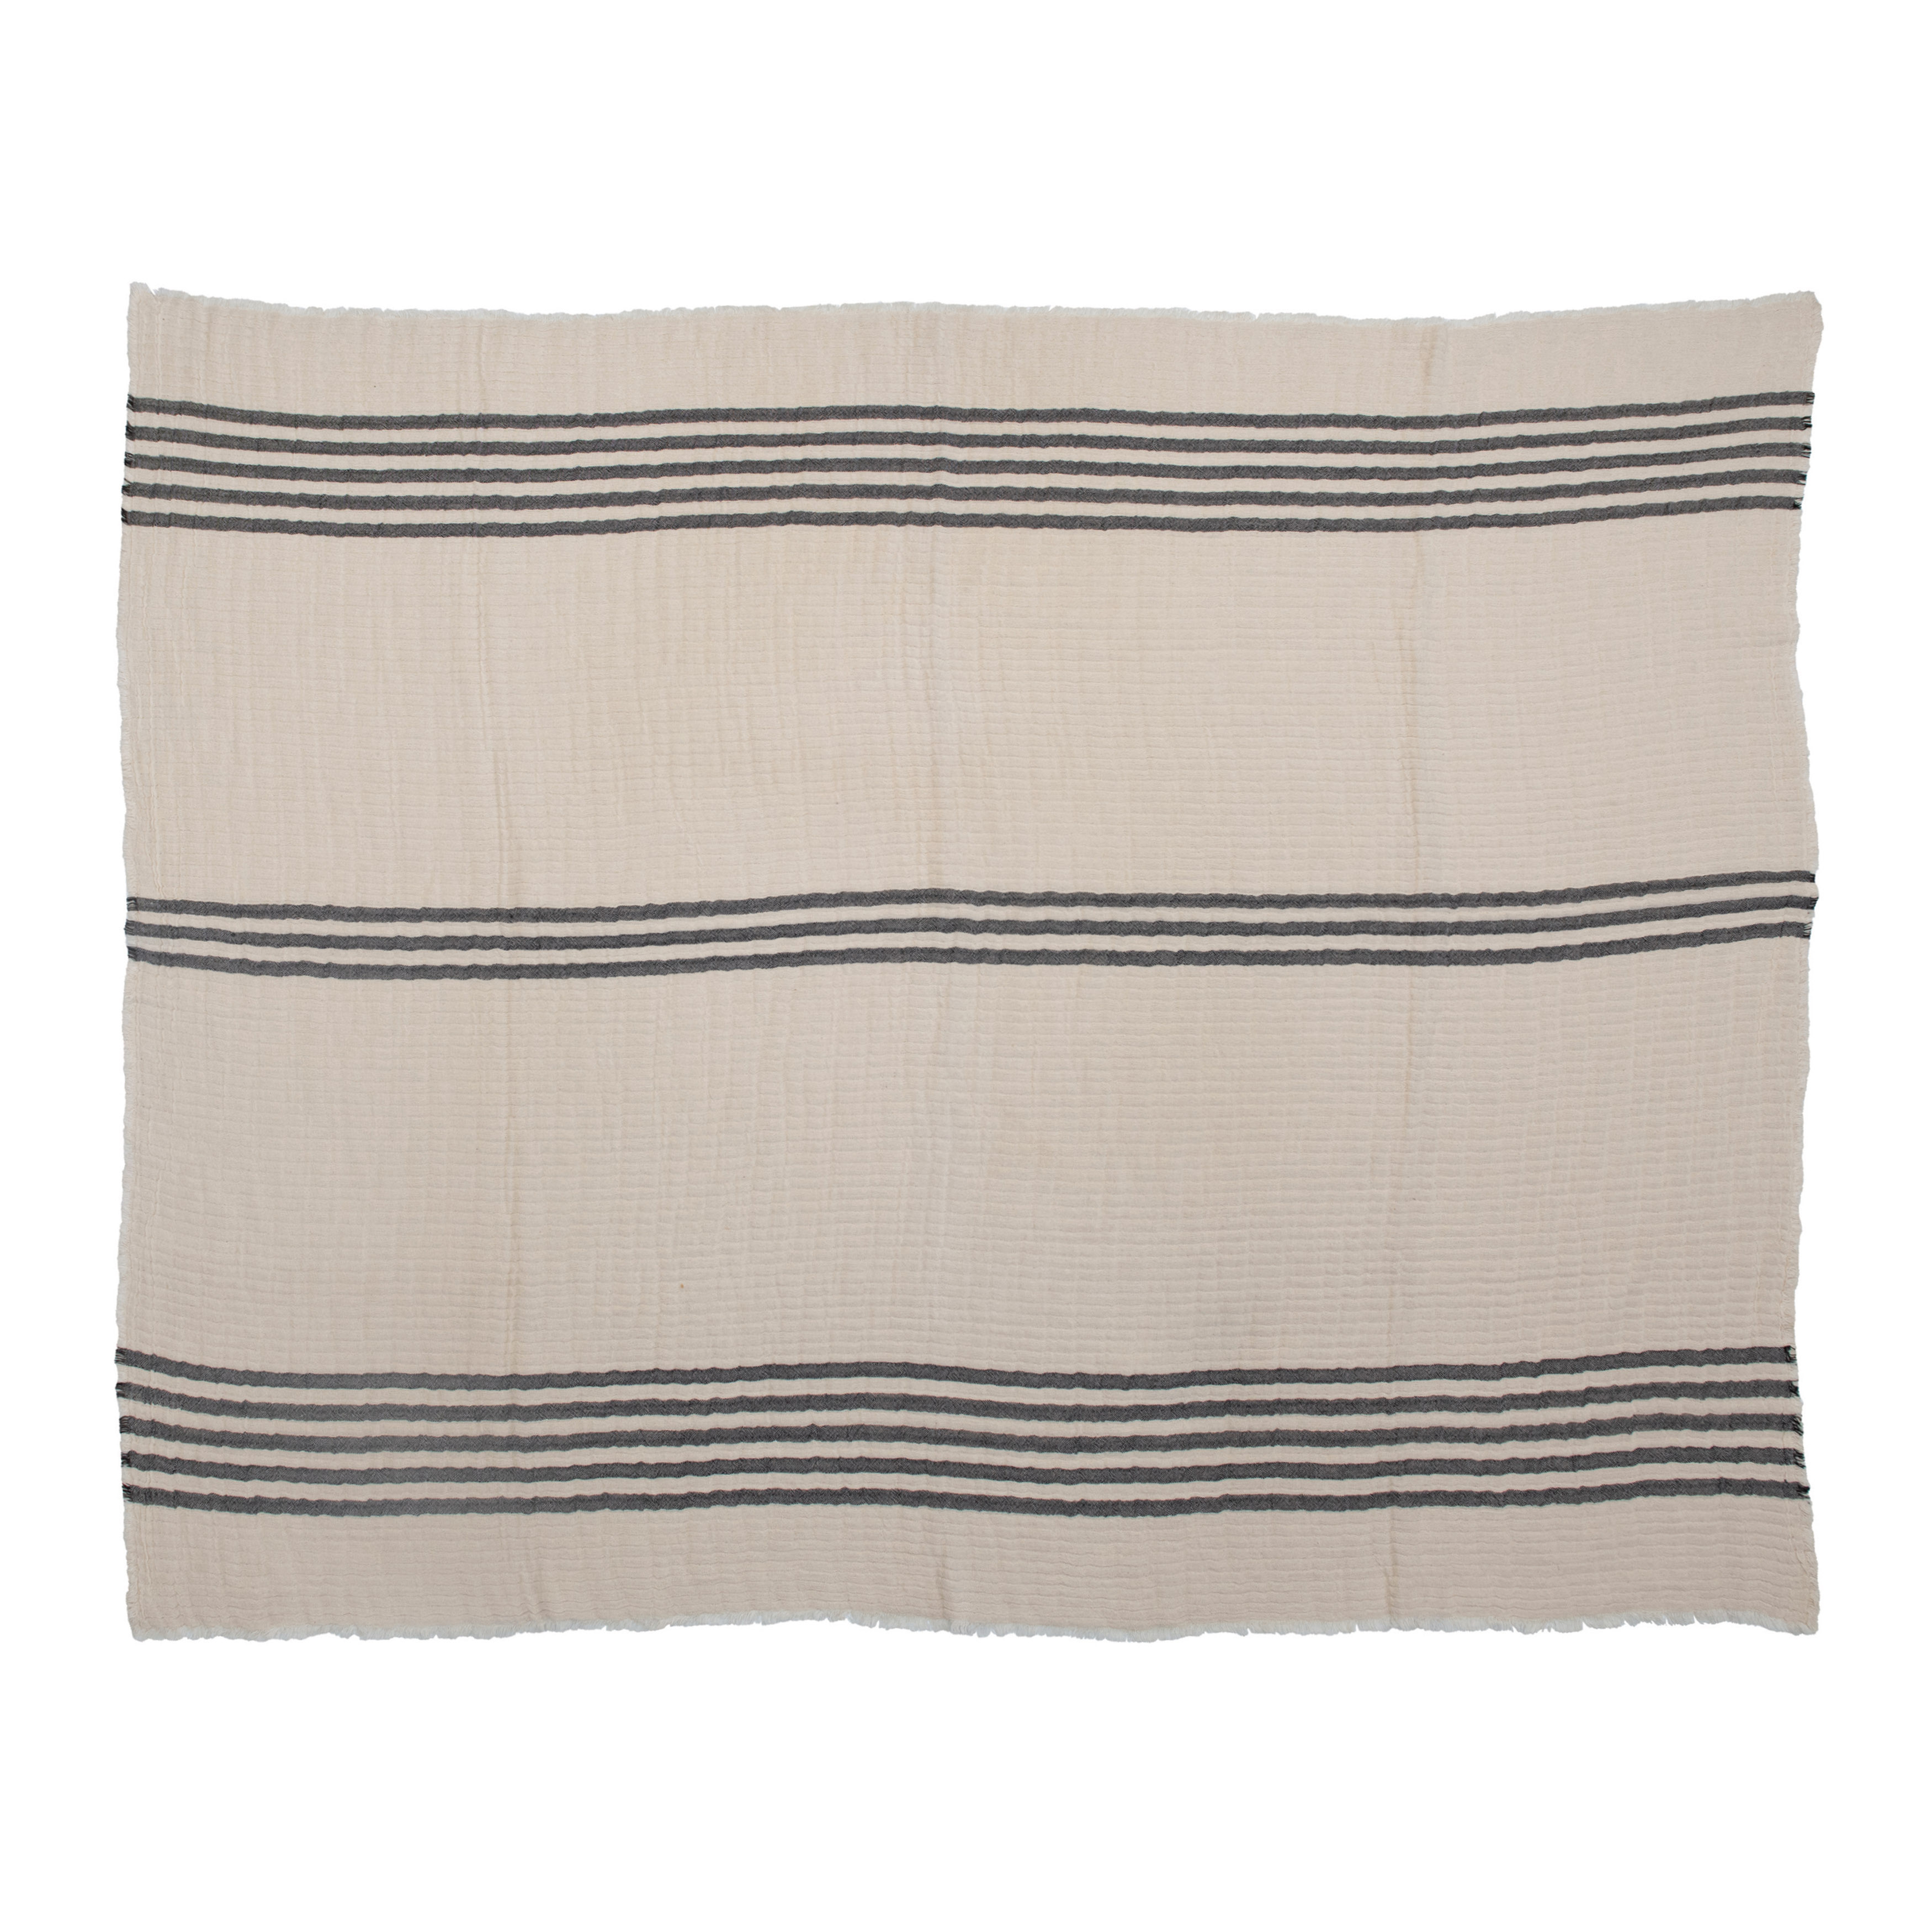 Coastal Black and White Stripe Woven Cotton Double Cloth Stitched Throw Blanket and Frayed Edges - Nomad Home